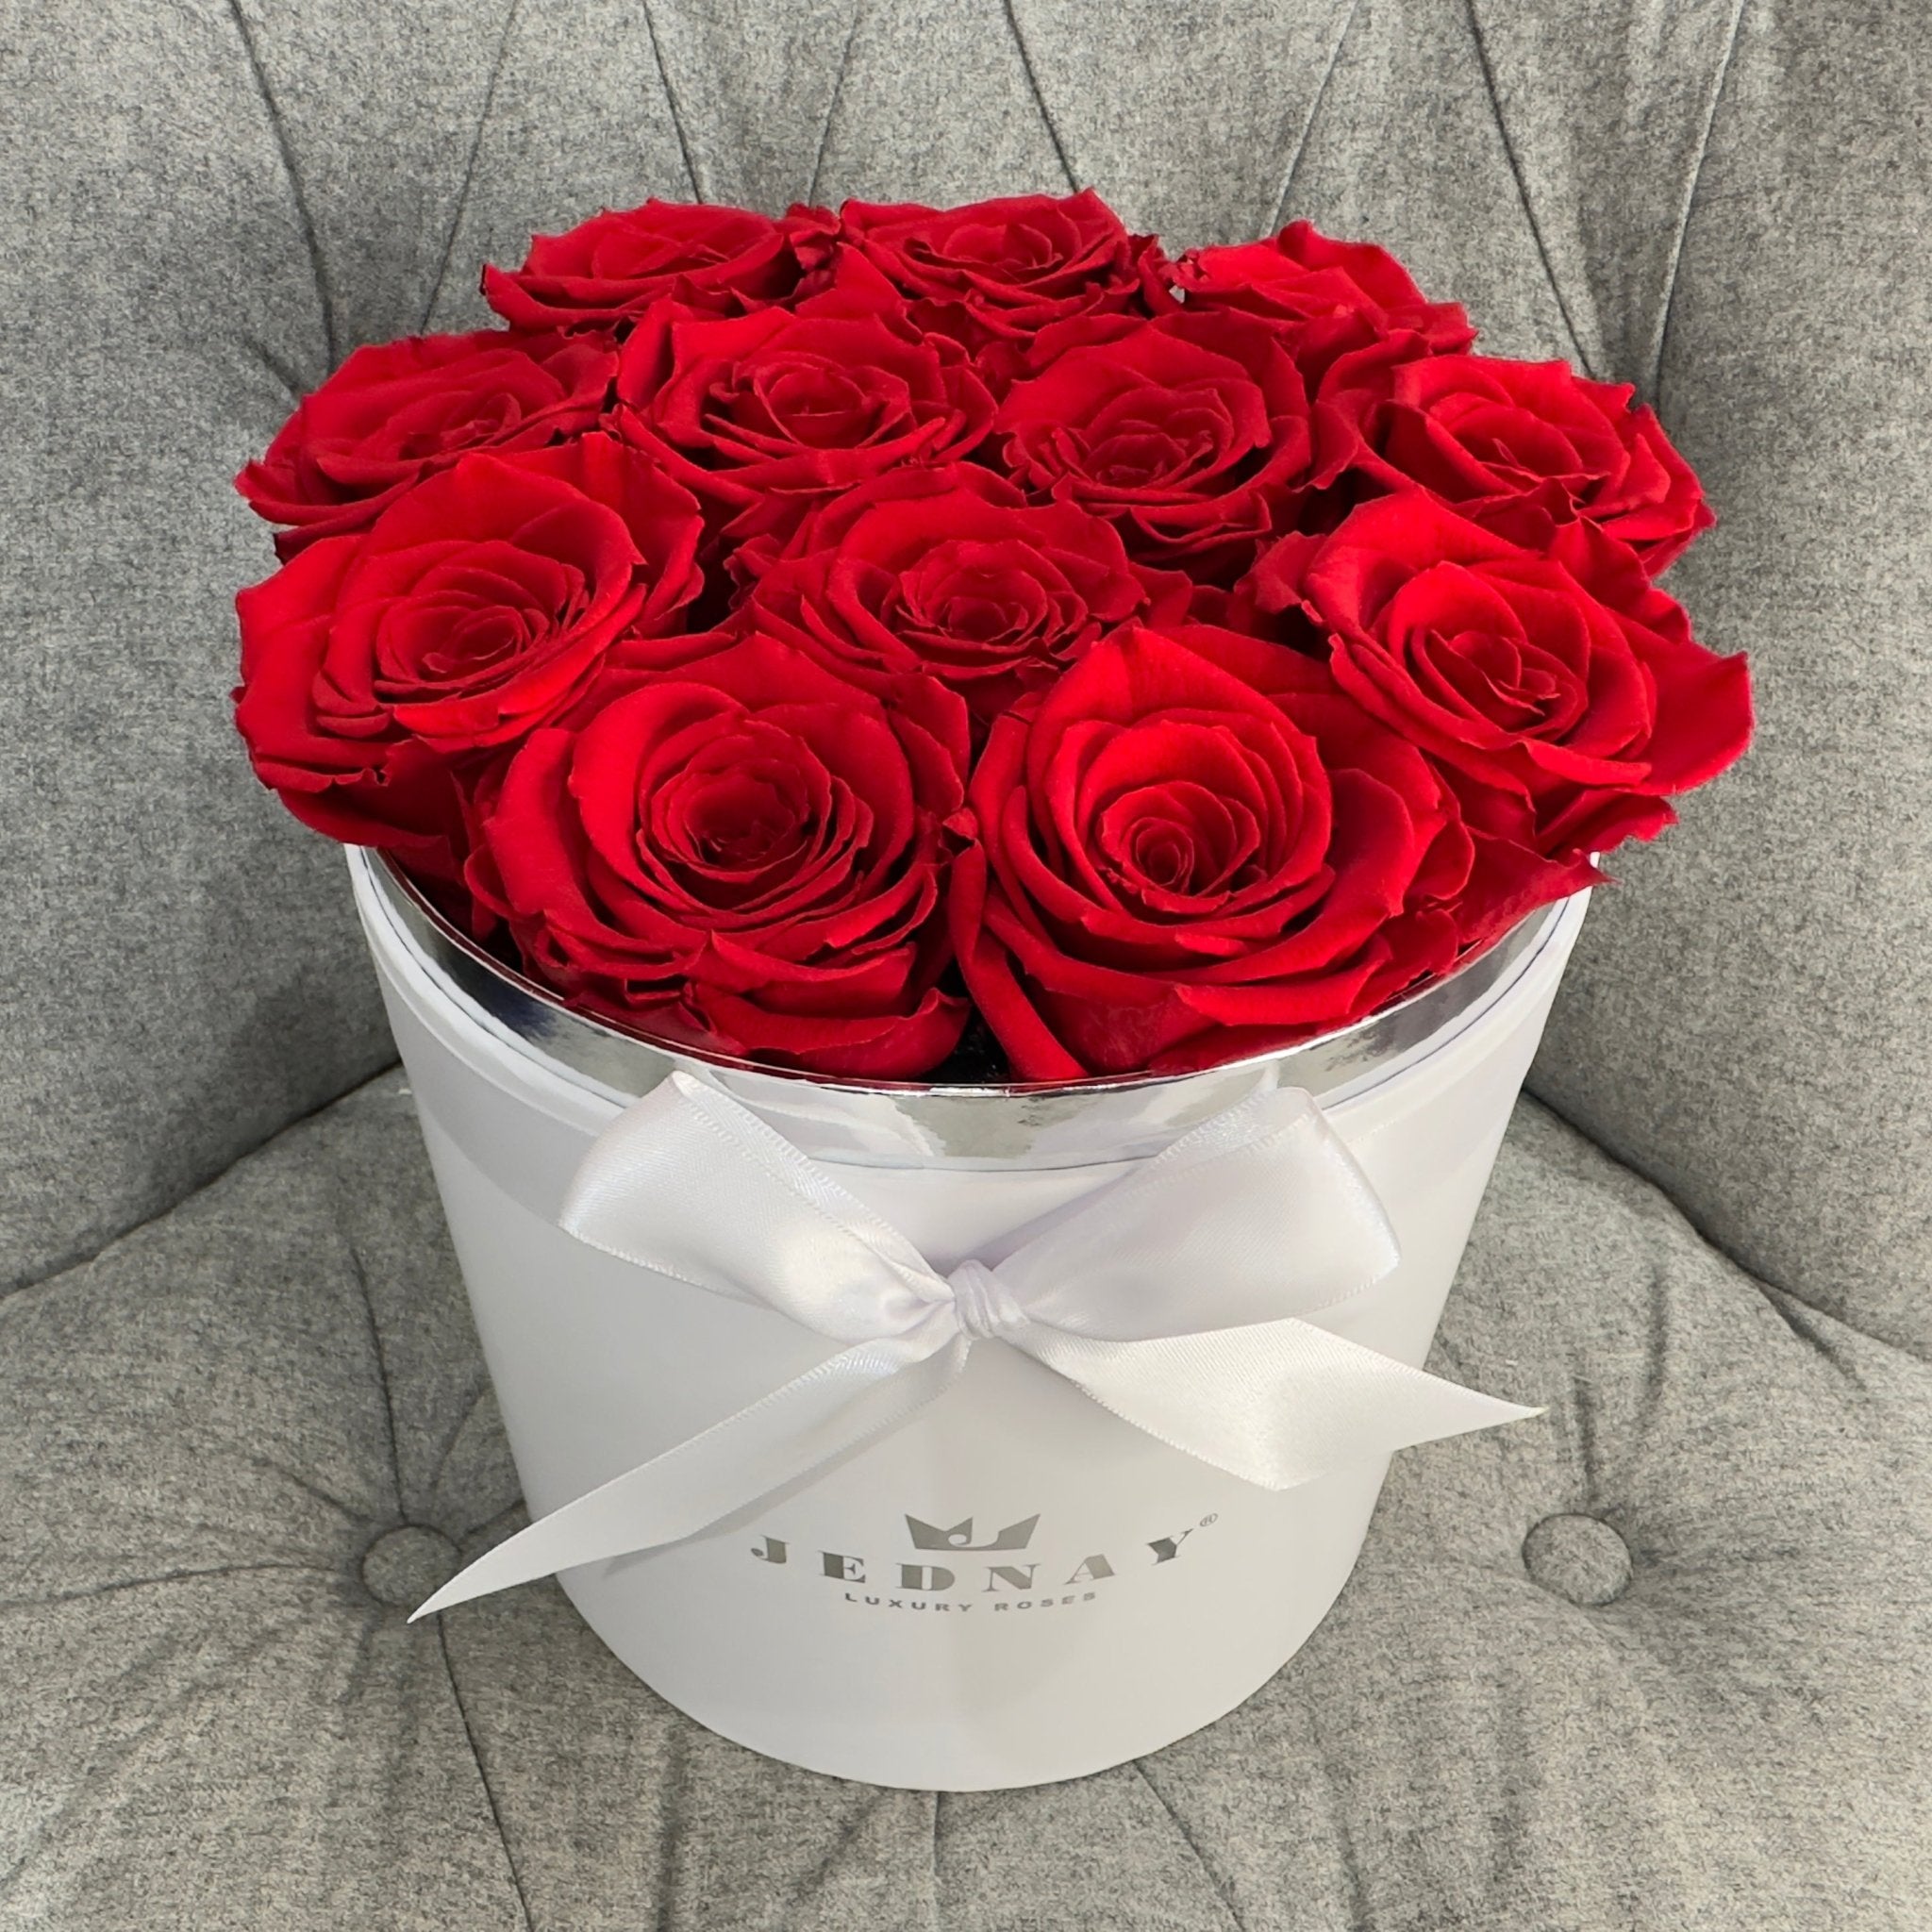 Large Classic White Forever Rose Box - Classic Red Eternal Roses - Jednay Roses